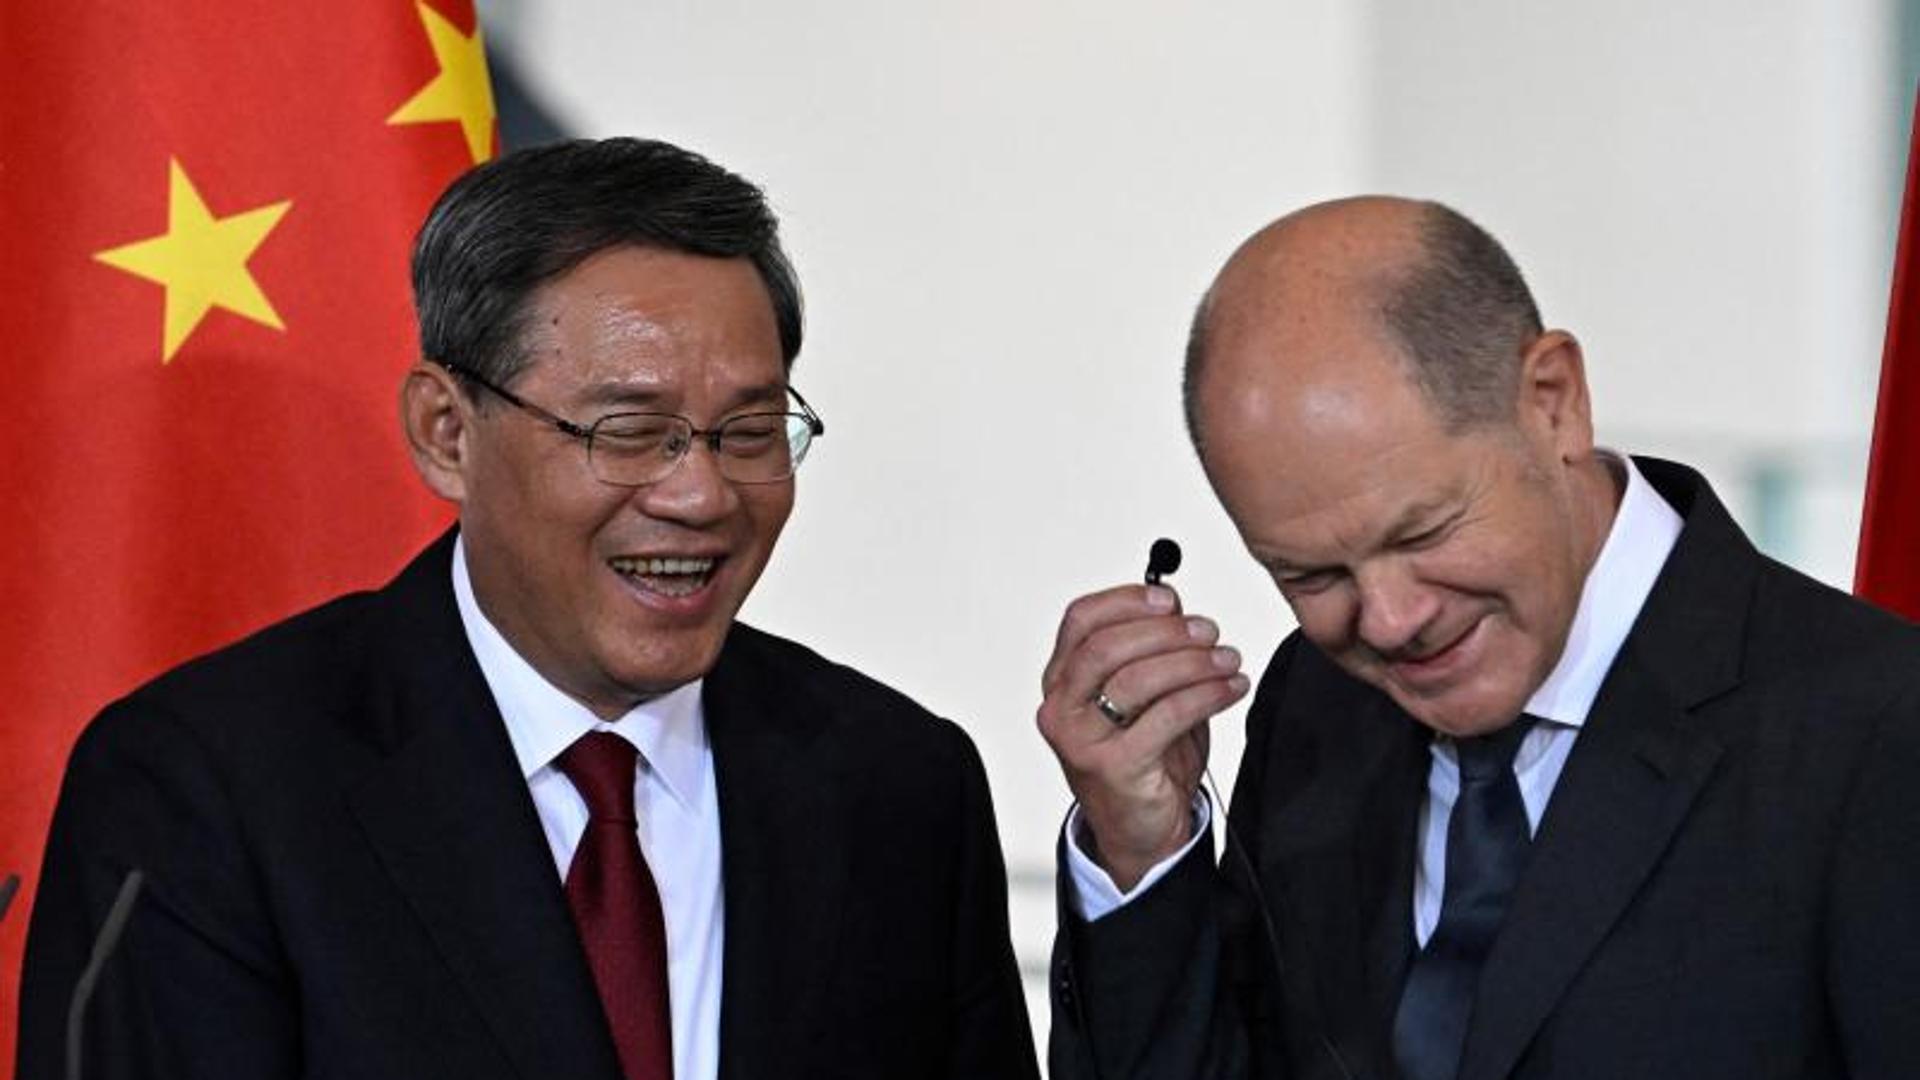 Germany and China strengthen their economic relations despite their political differences